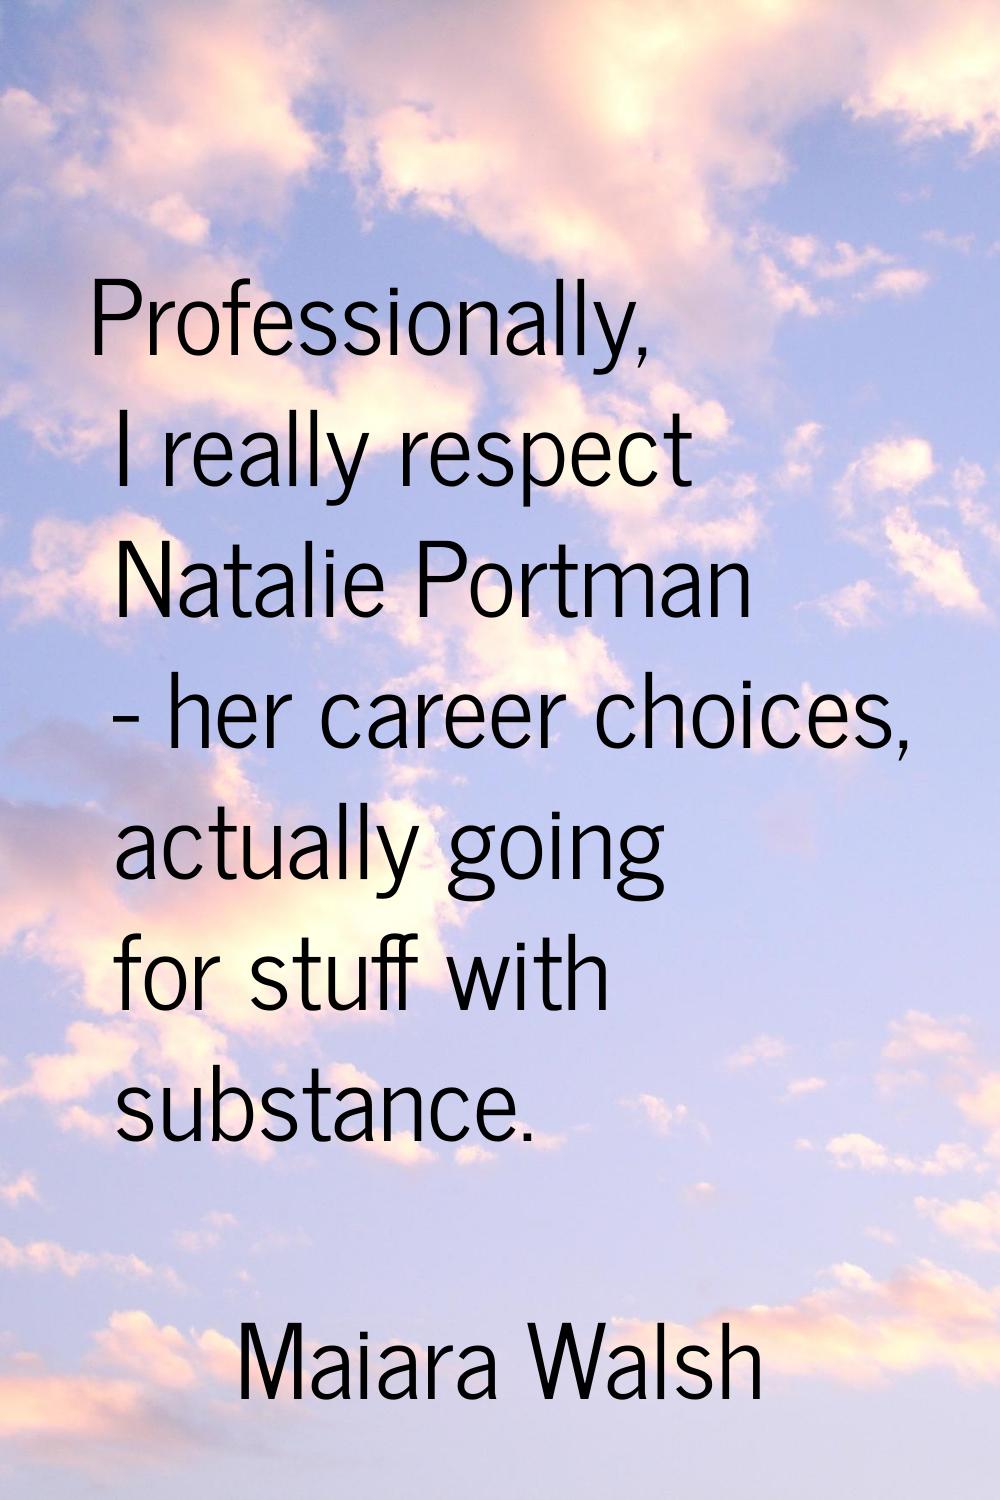 Professionally, I really respect Natalie Portman - her career choices, actually going for stuff wit